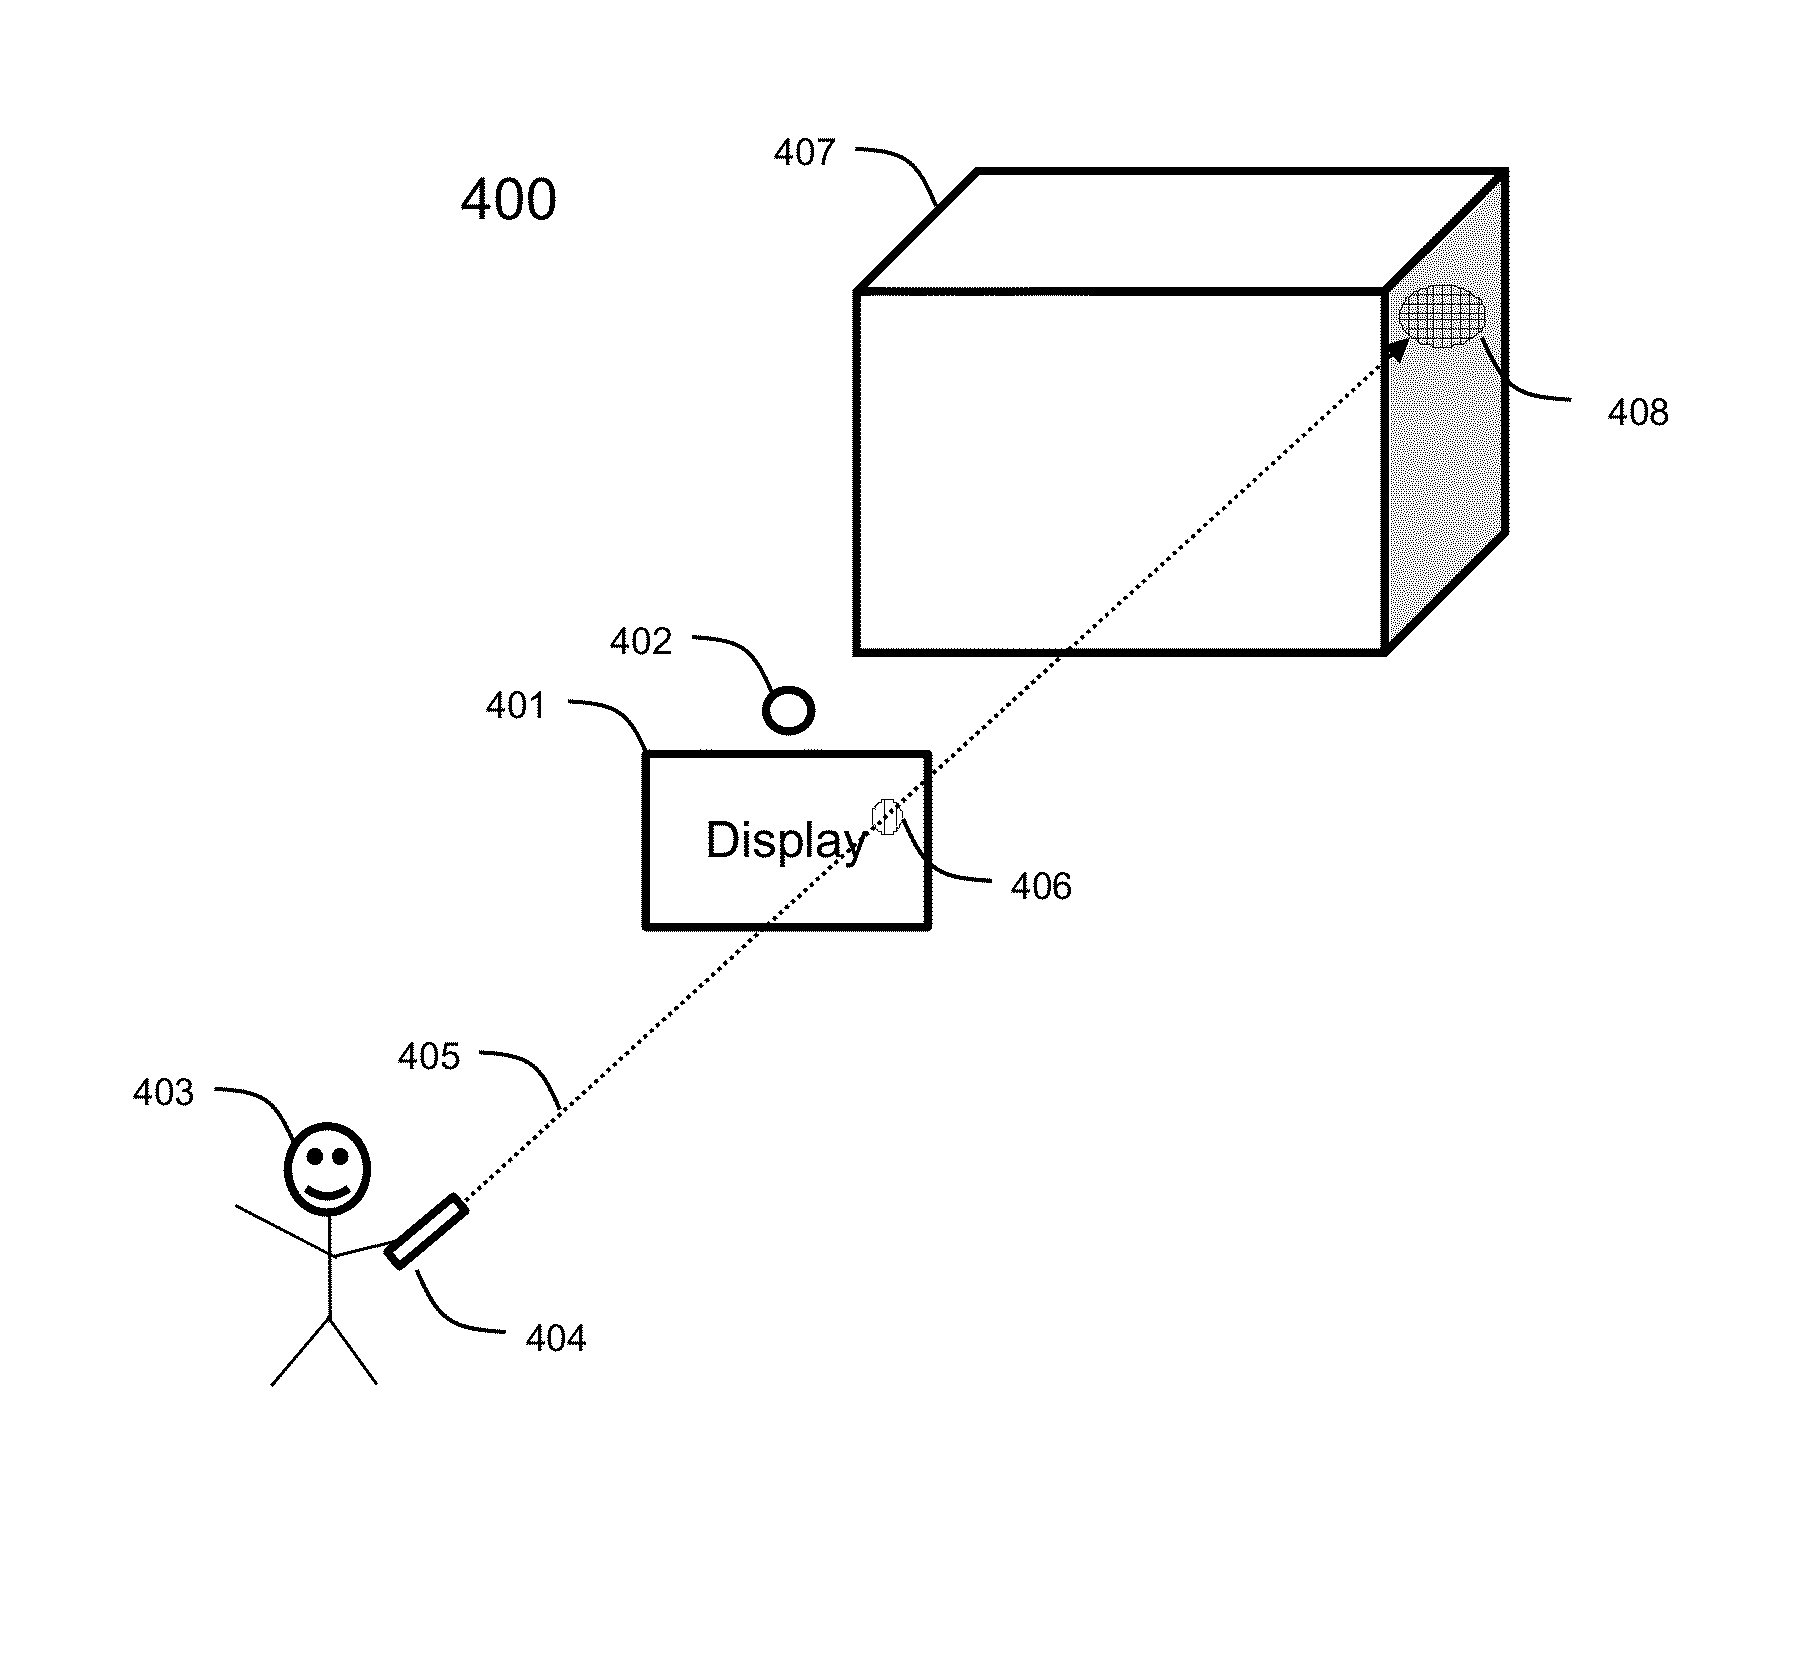 Method and system for making a selection in 3D virtual environment